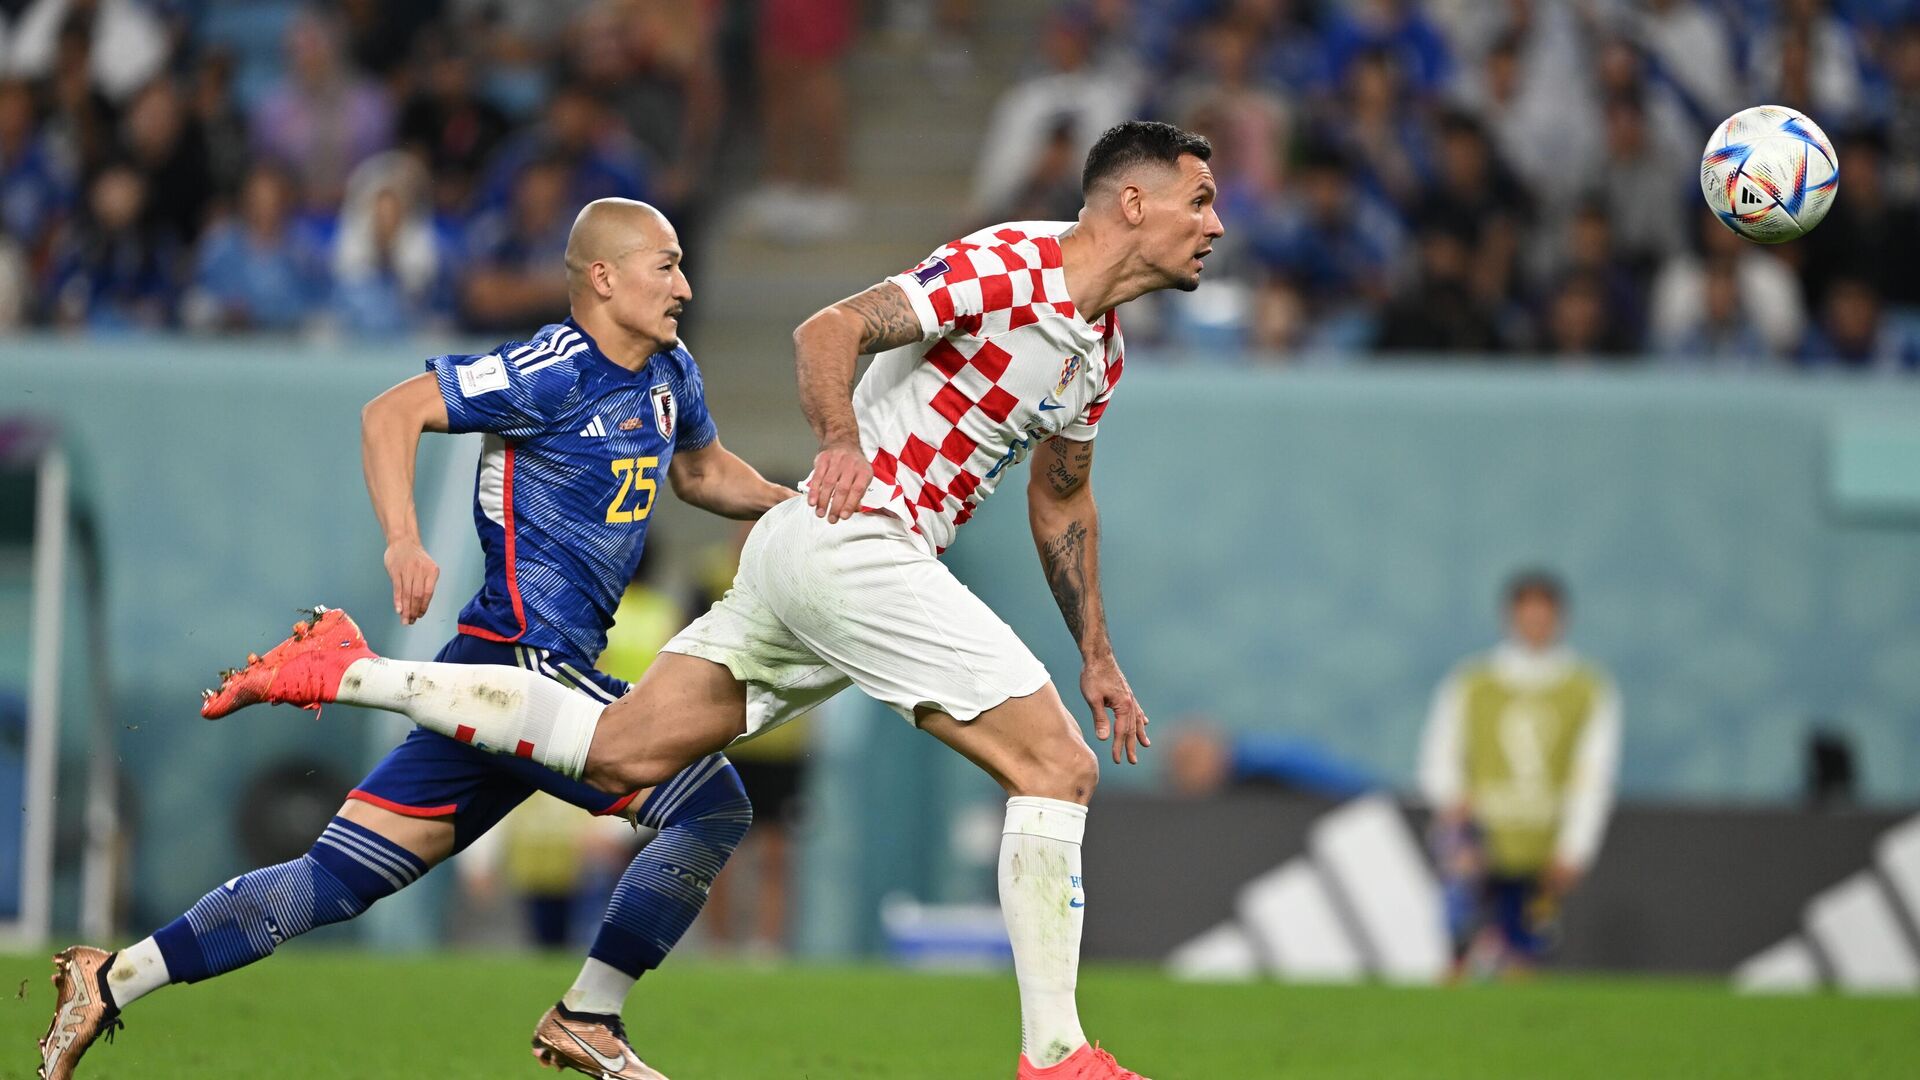 Lovren was not included in Croatia’s starting 11 against Morocco